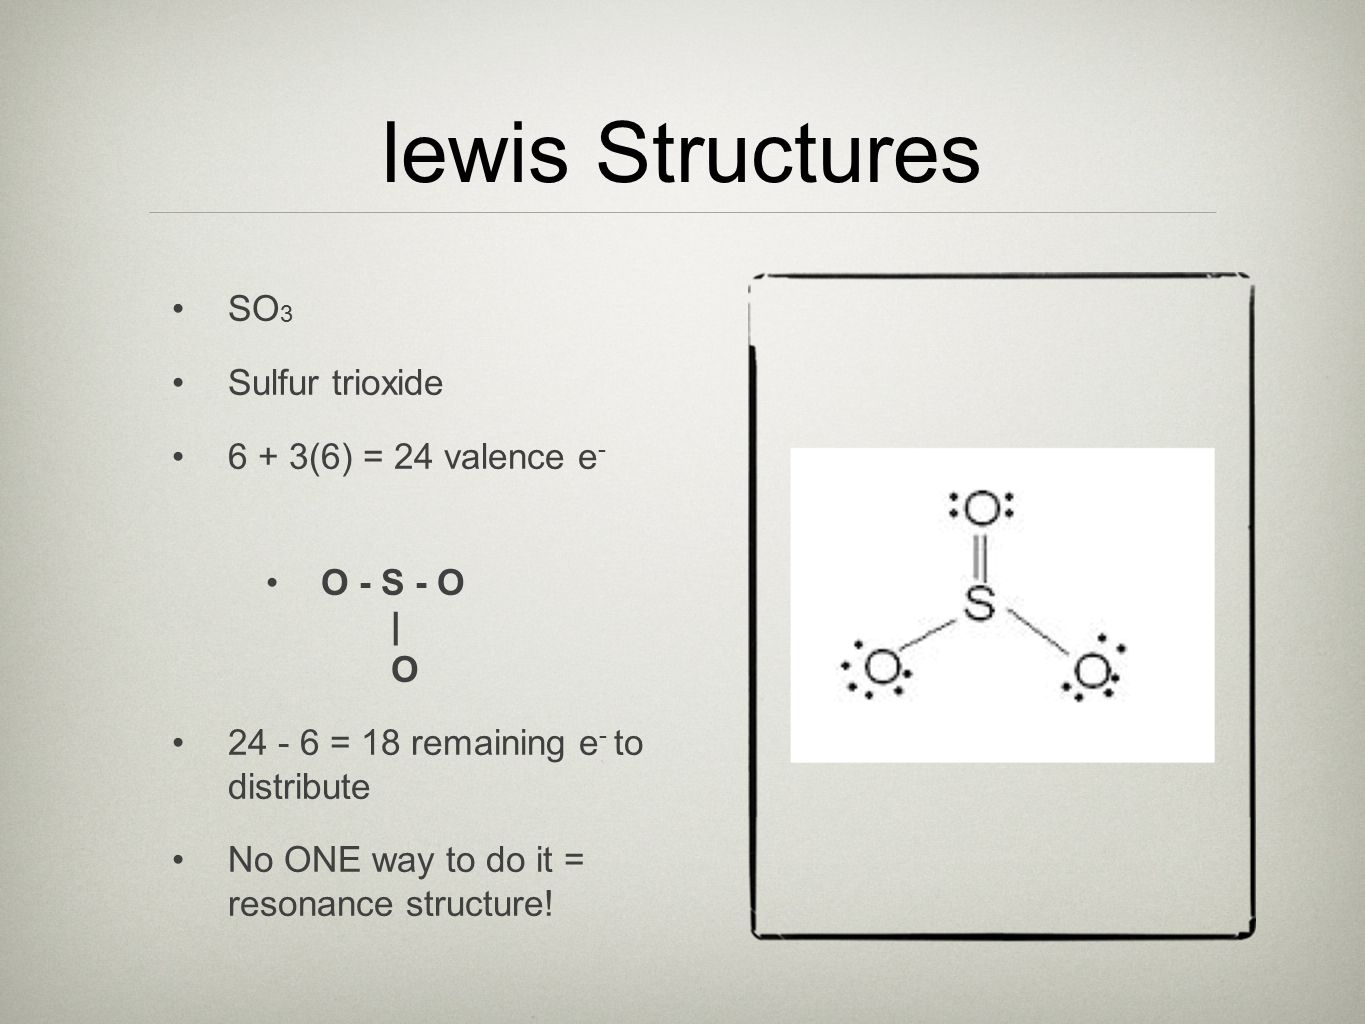 lewis Structures SO 3 Sulfur trioxide 6 + 3(6) = 24 valence e - O - S - O | O = 18 remaining e - to distribute No ONE way to do it = resonance structure!